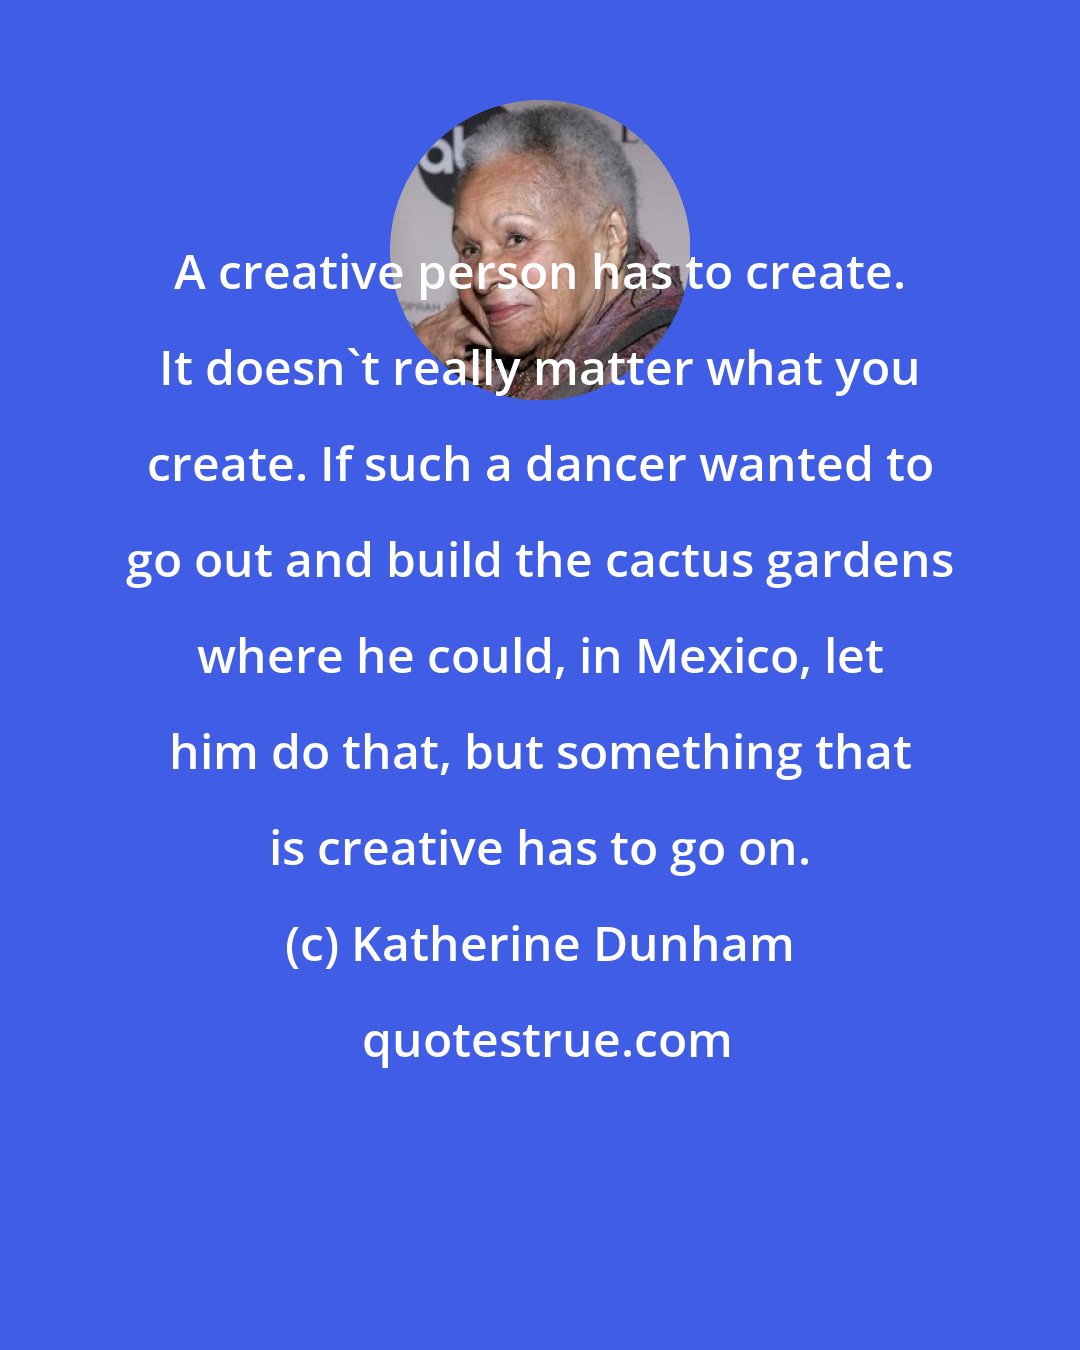 Katherine Dunham: A creative person has to create. It doesn't really matter what you create. If such a dancer wanted to go out and build the cactus gardens where he could, in Mexico, let him do that, but something that is creative has to go on.